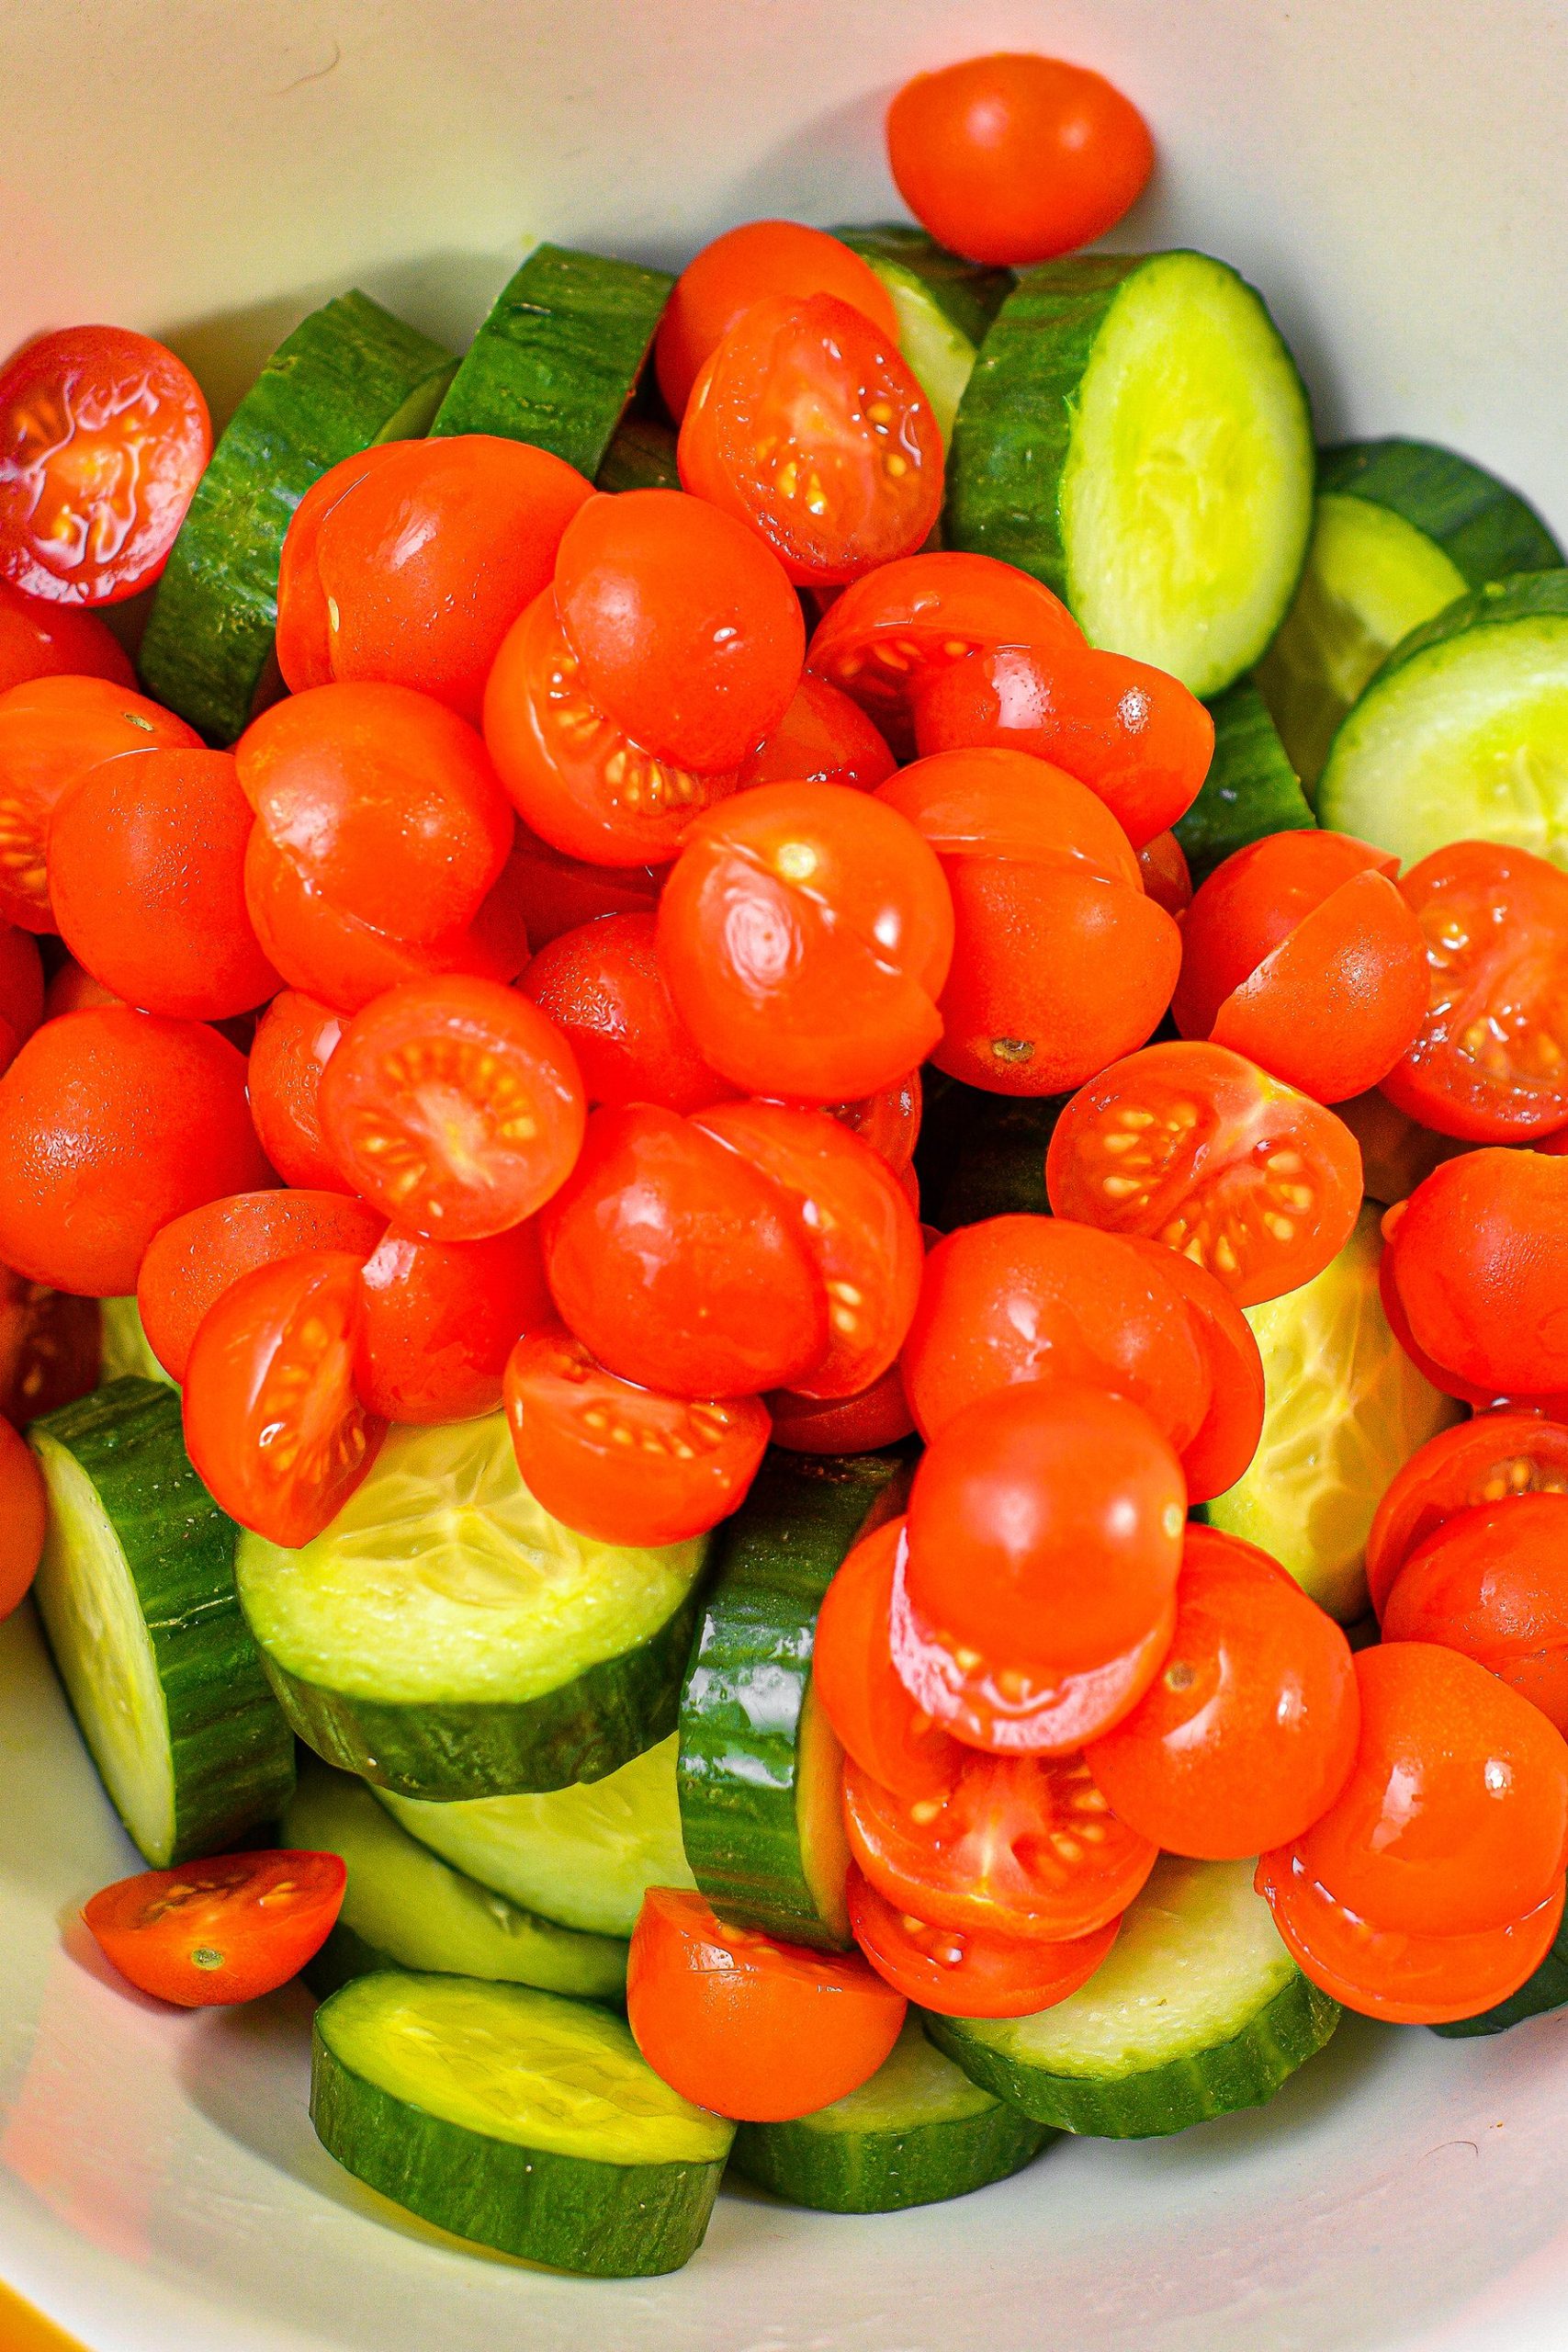 In a large bowl, toss together the cucumbers, tomatoes and onions.